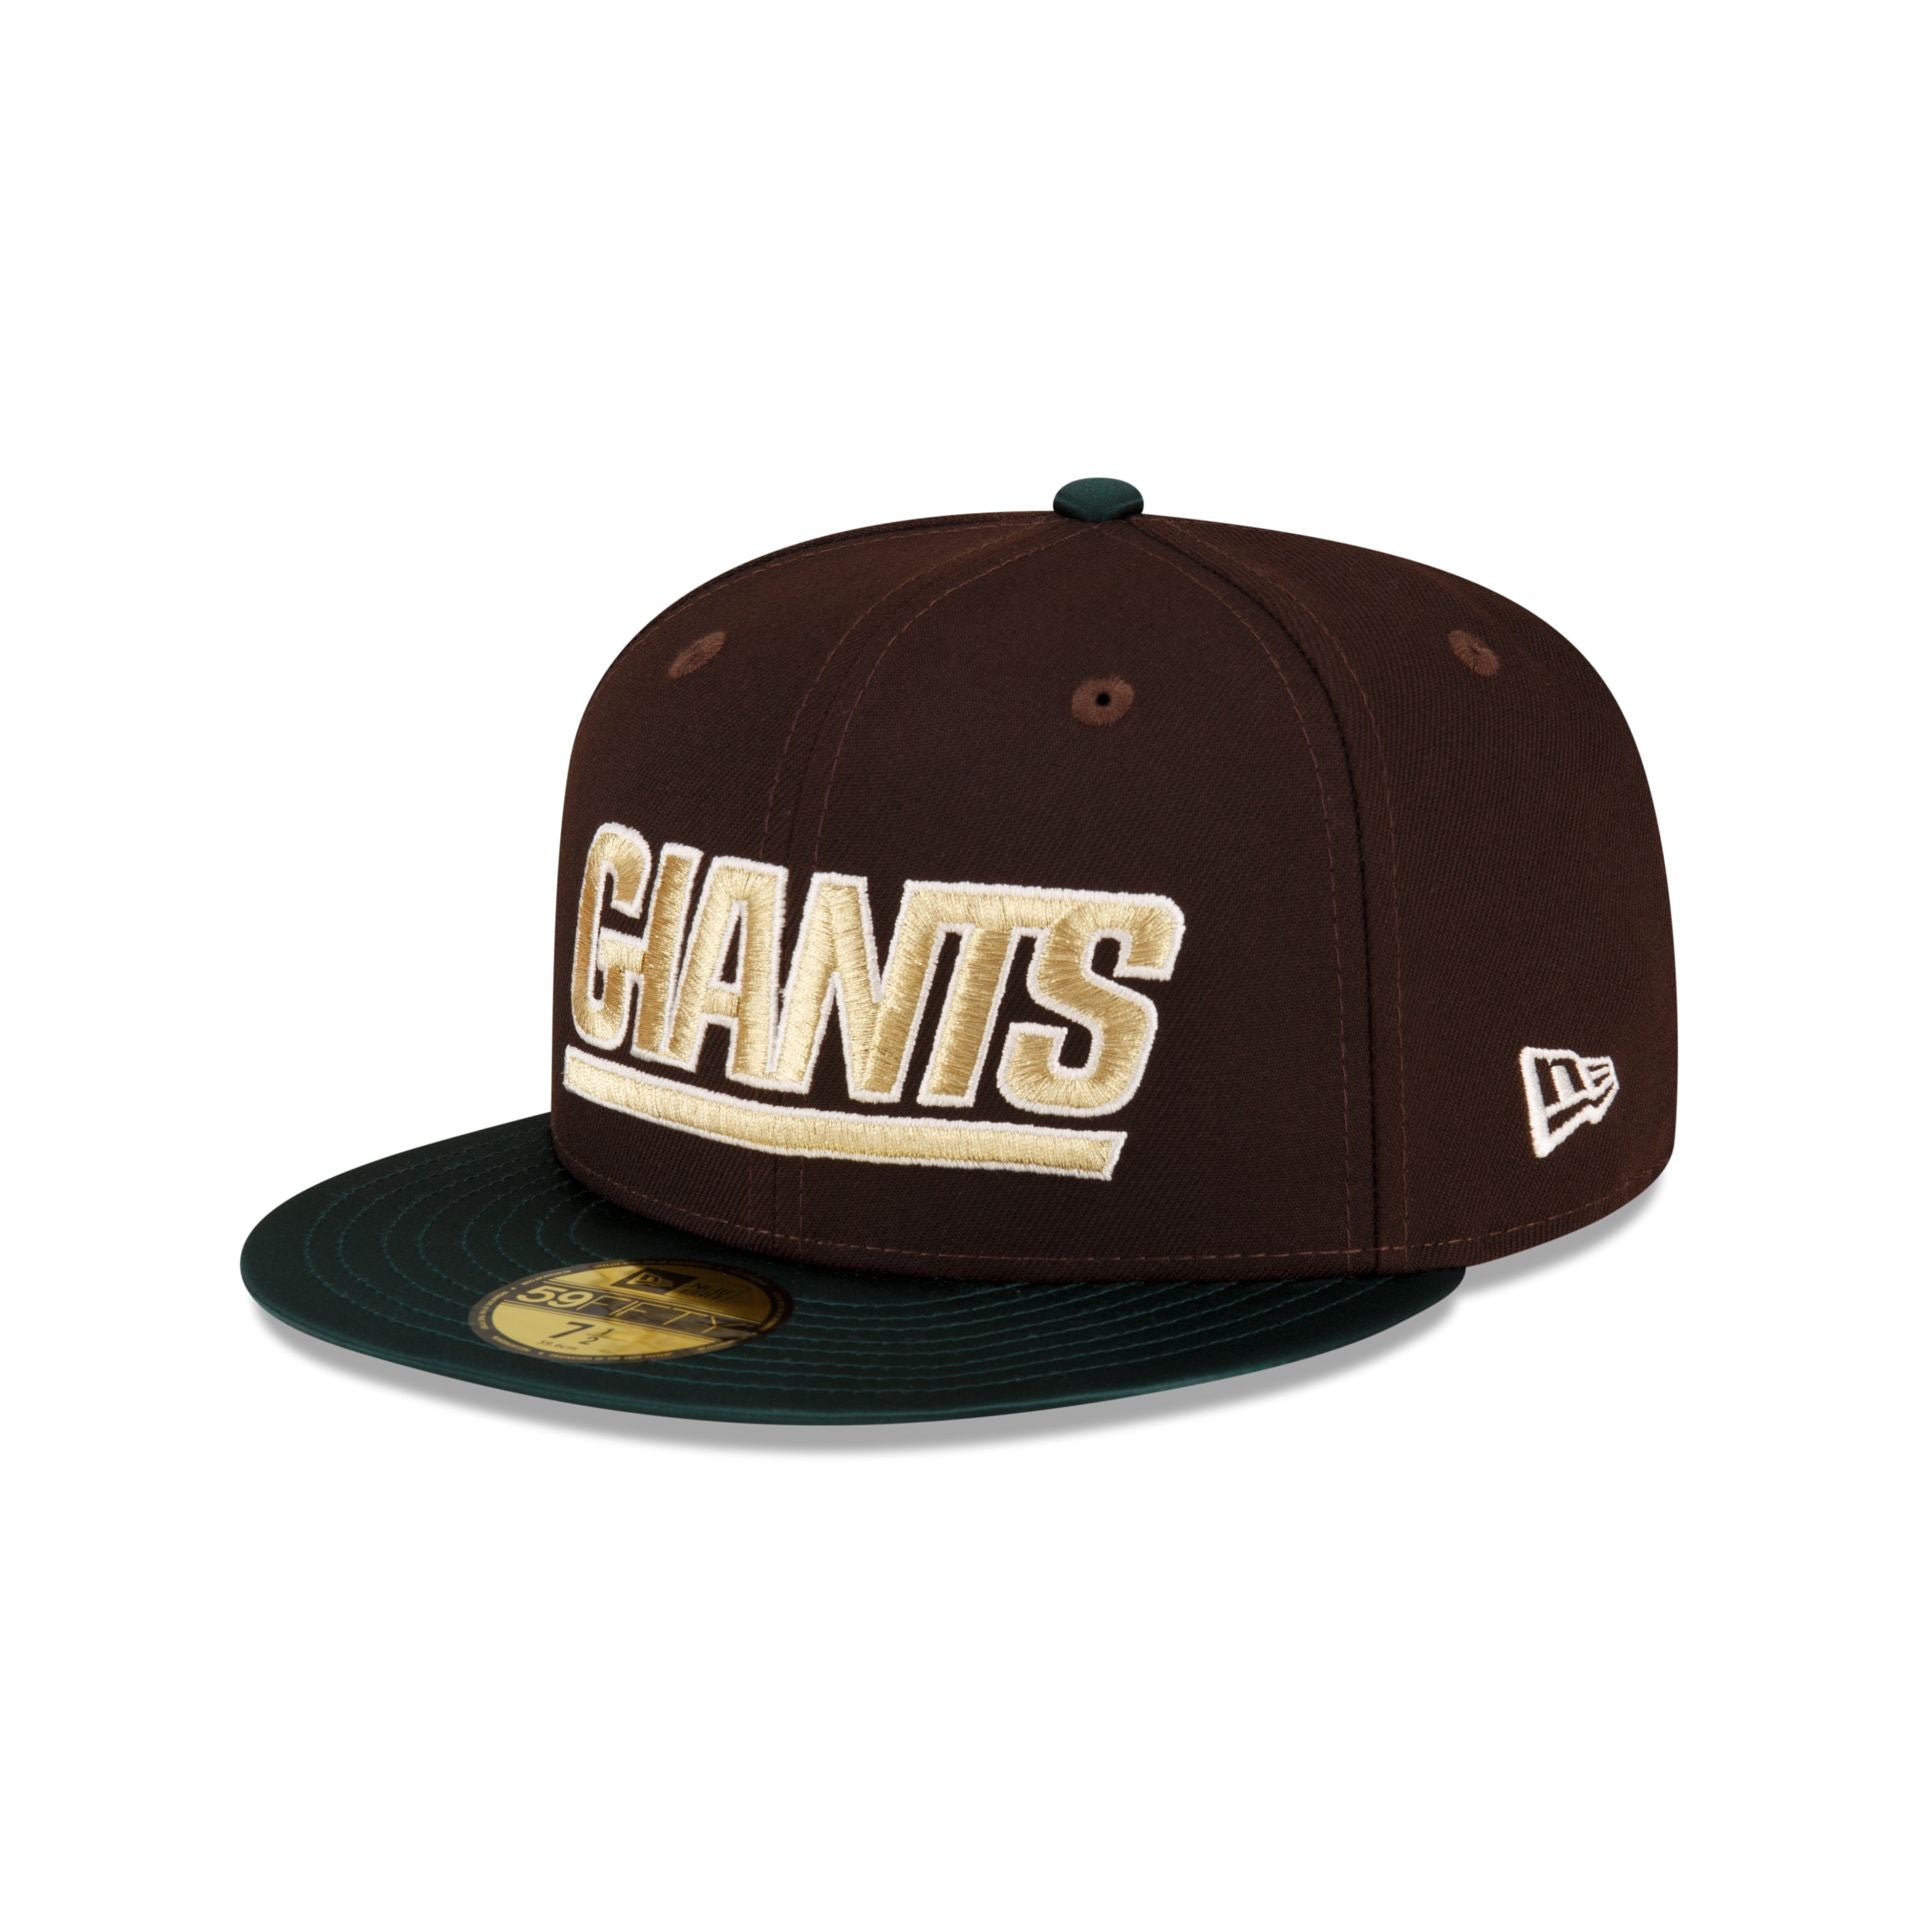 Just Caps Green Satin New York Giants 59FIFTY Fitted Hat, Brown - Size: 7, NFL by New Era